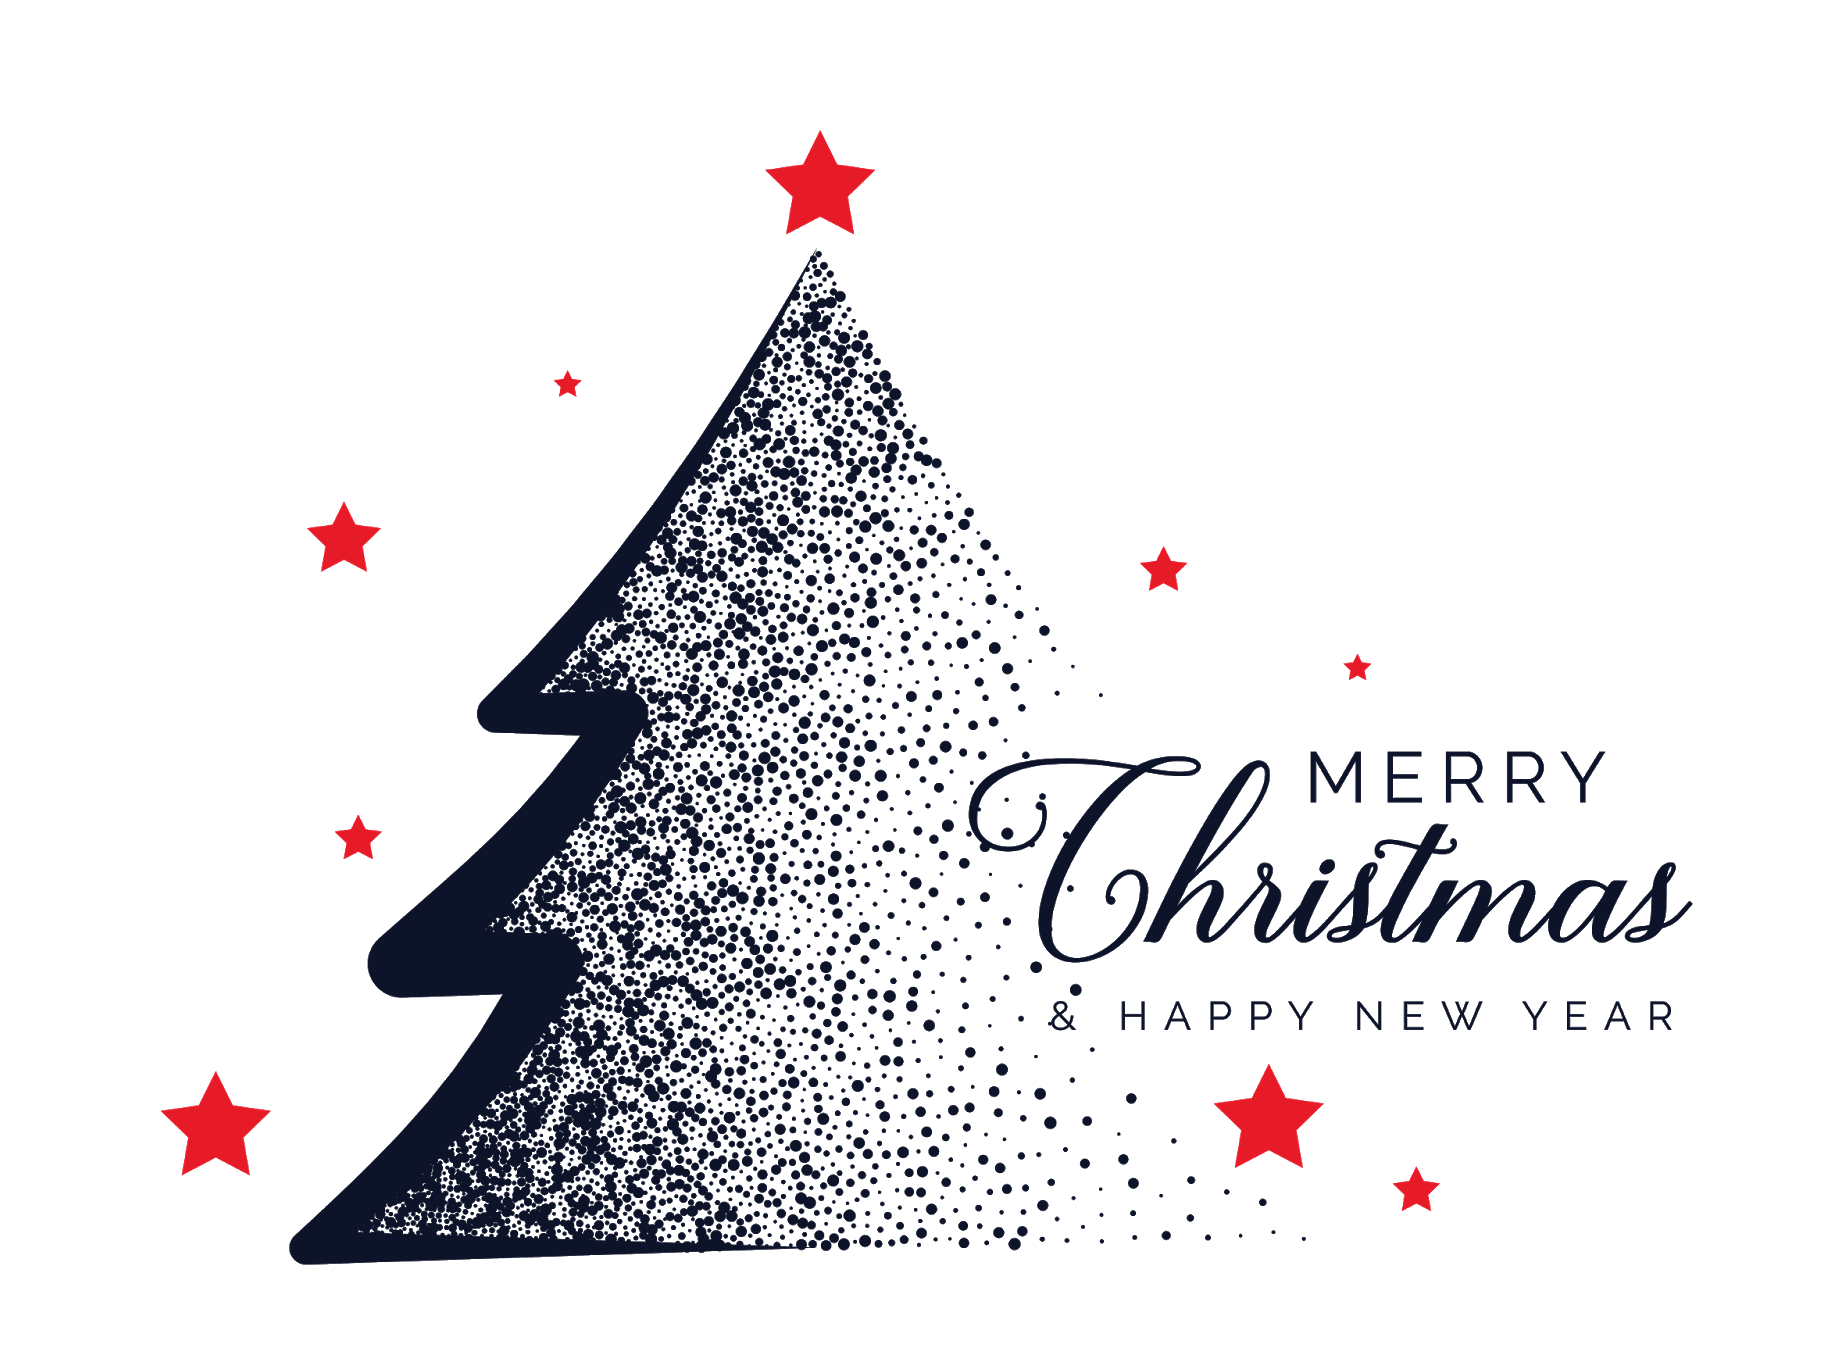 Christmas PNG HD and Transparent 460x460 #100854 1472x944 Pixel ...